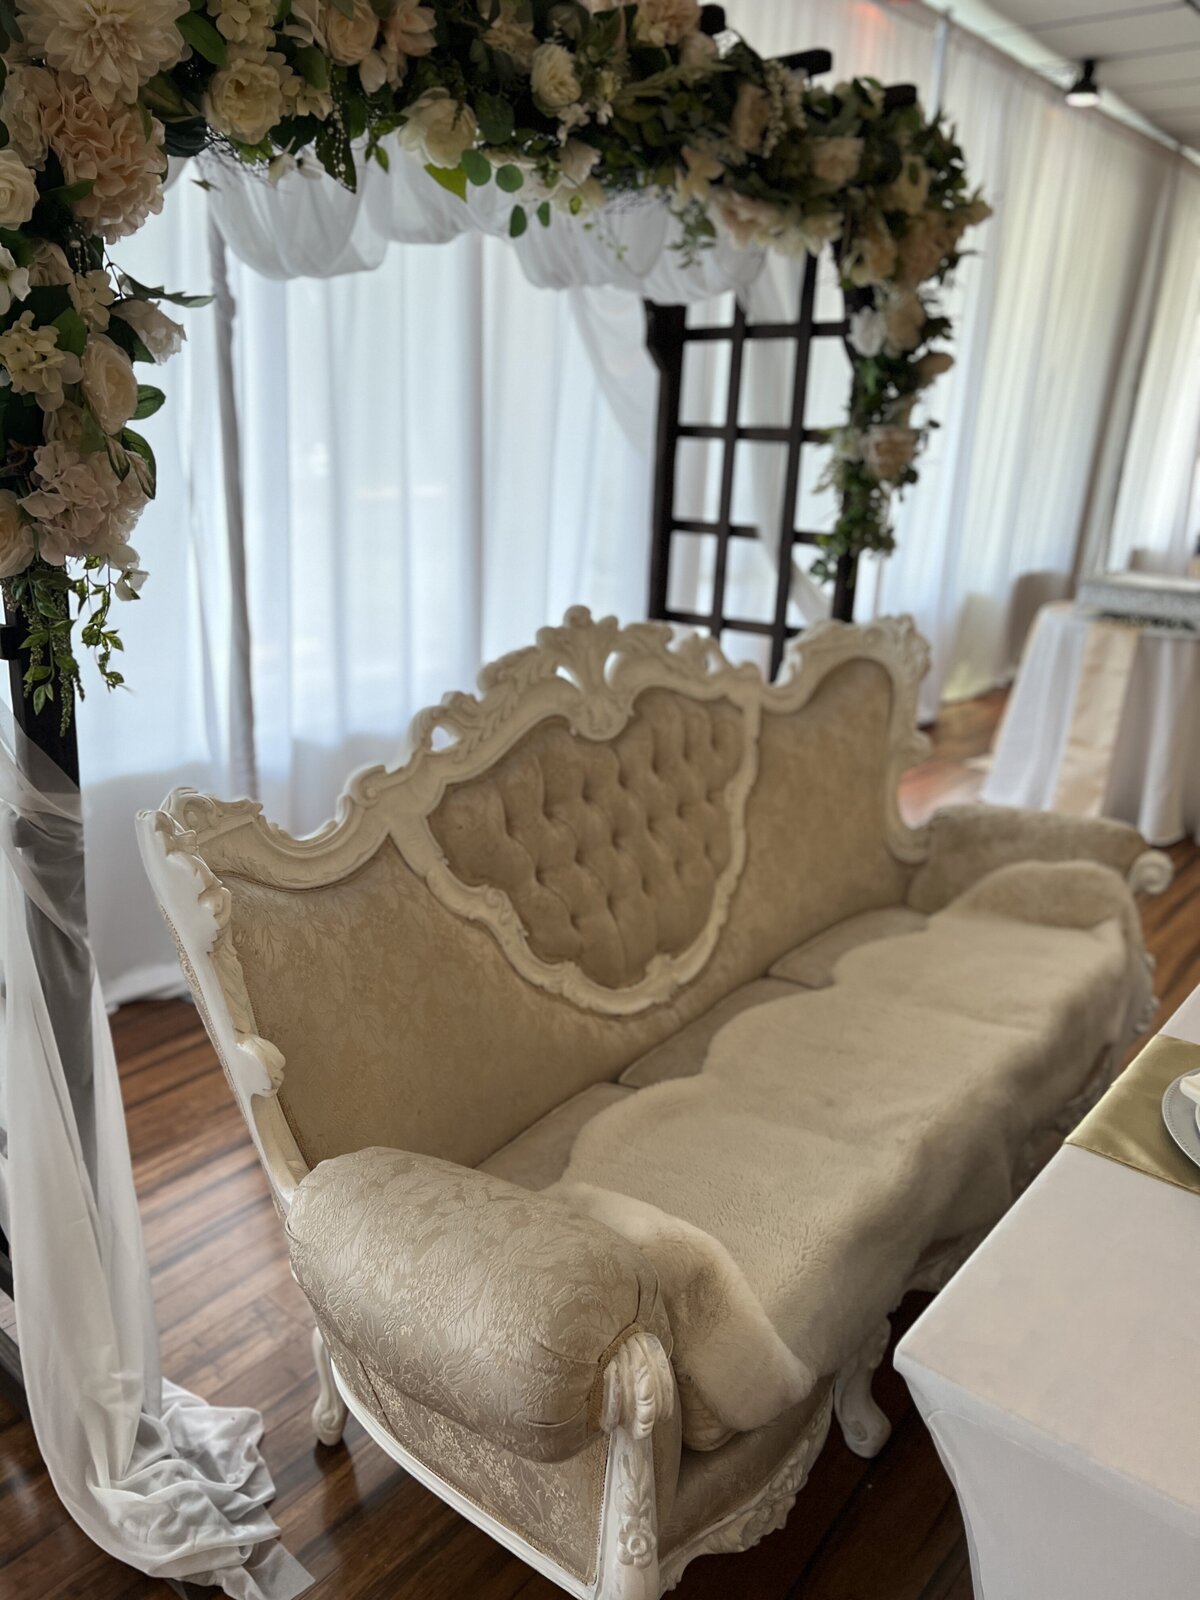 White Victoria couch at the head table for a grand reception of the bride and groom at our Clearwater banquet hall - Adding elegance and sophistication to their special day